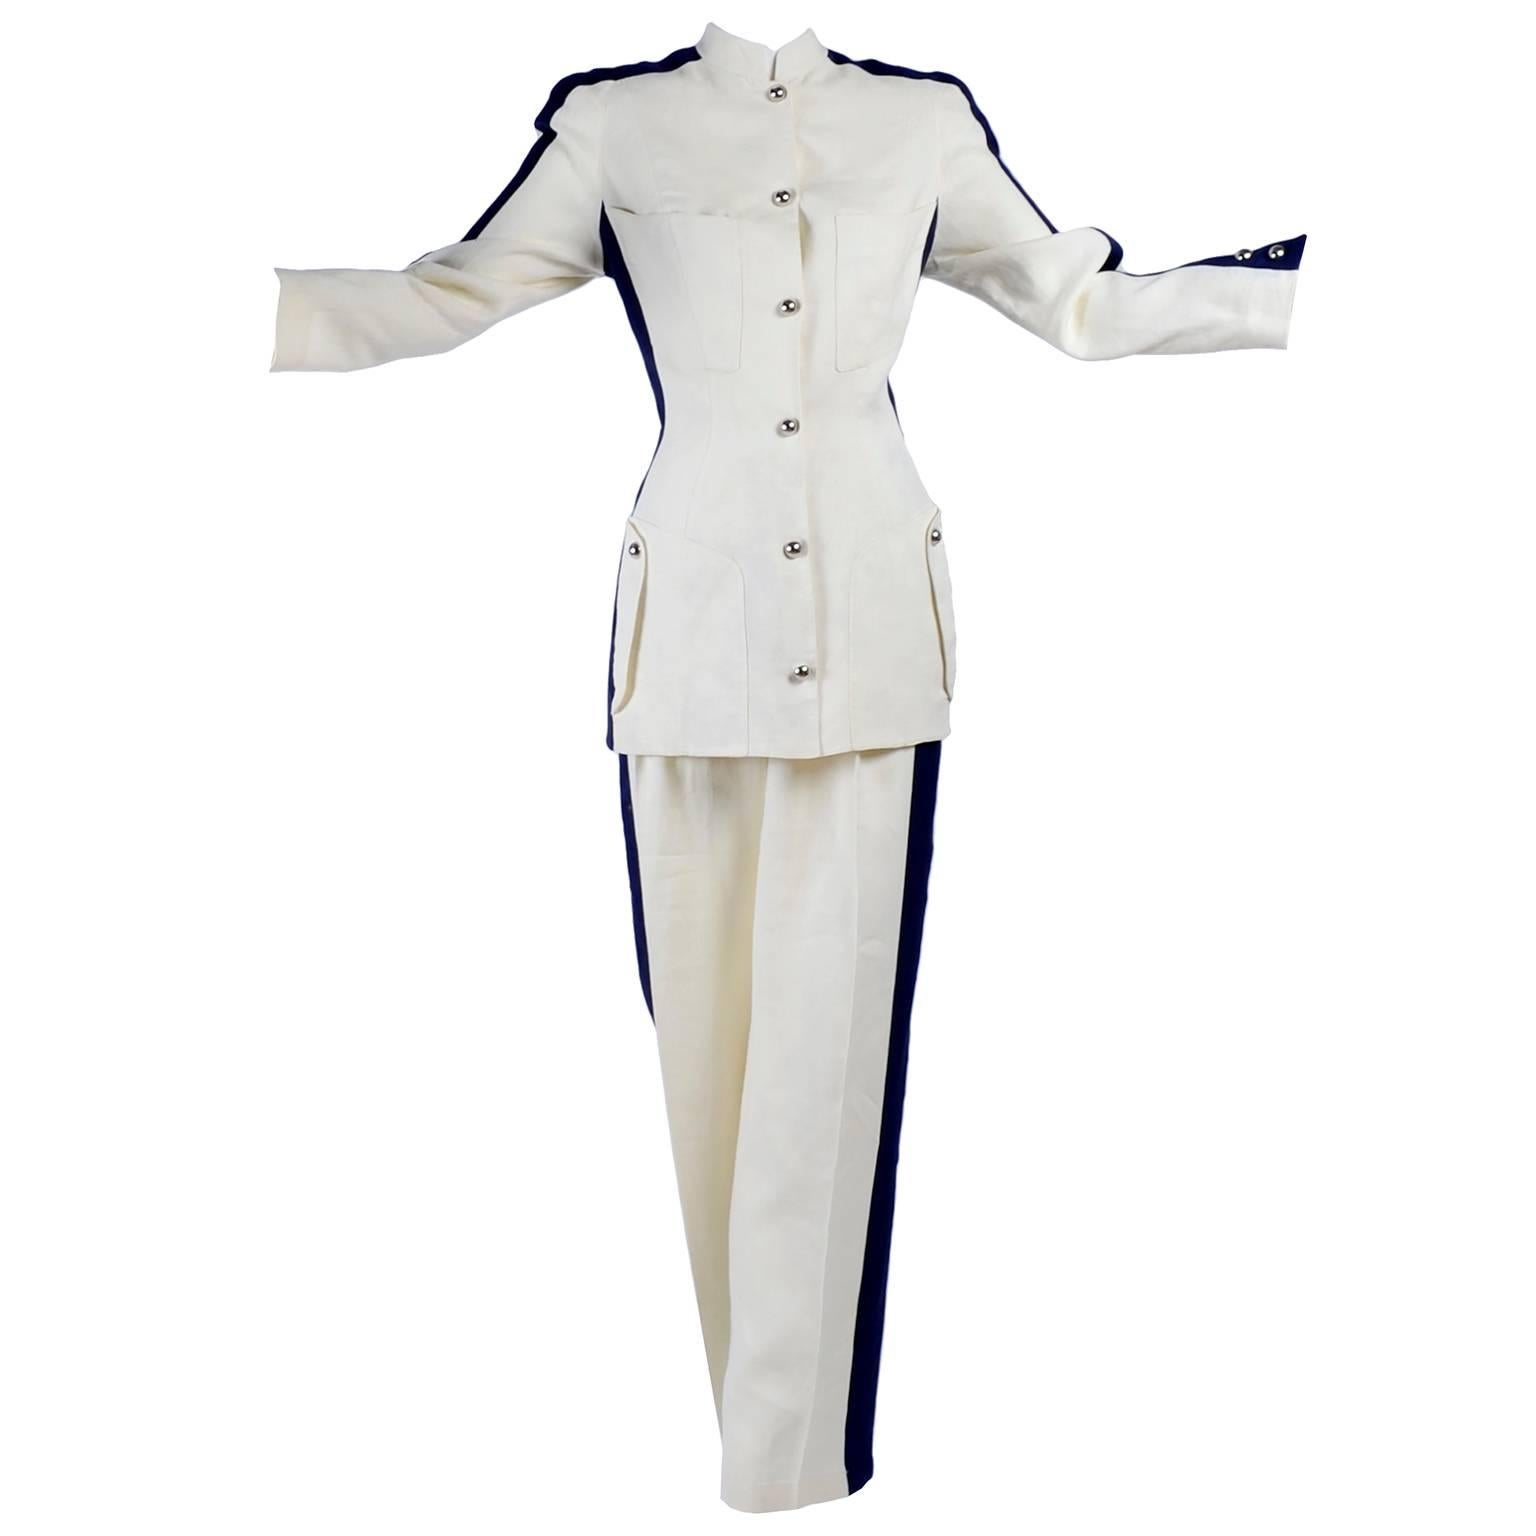 This is a fabulous 2 piece lighter weight linen blend pant suit designed by Thierry Mugler that includes a pair of high waist trousers and a long jacket. Both the jacket and pants have wide tuxedo style navy blue stripes up the side. The jacket is